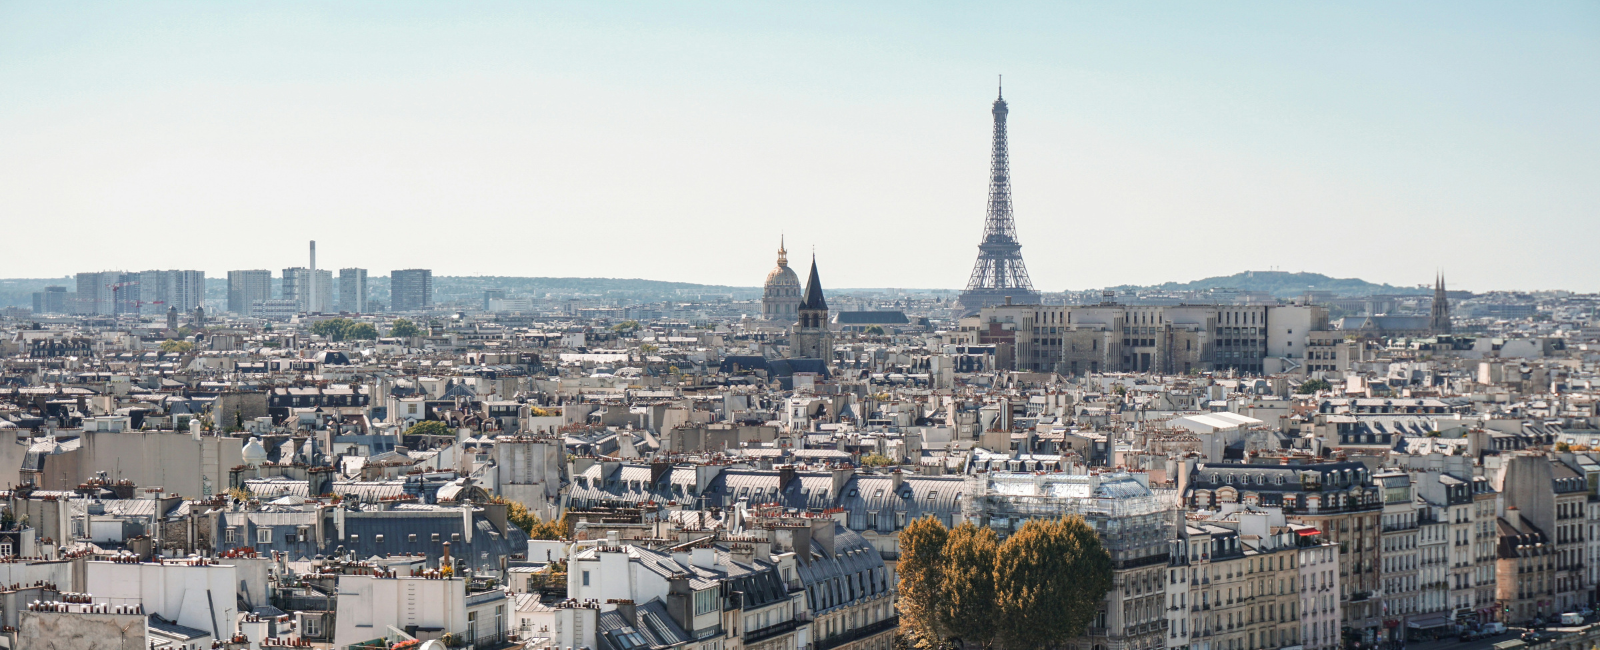 View of Paris skyline with Eiffel Tower at a distance